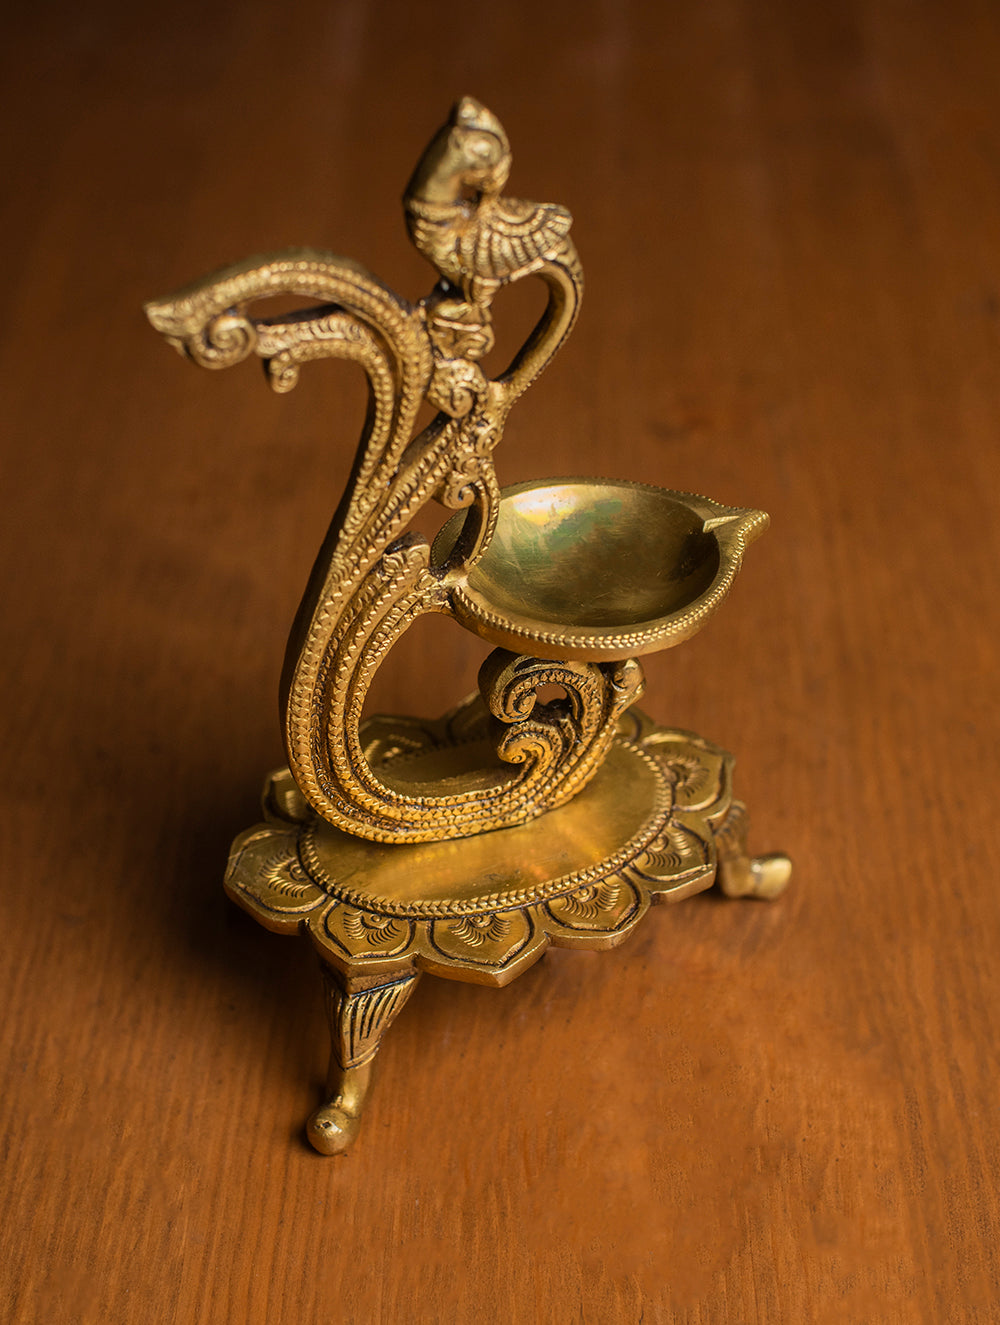 Load image into Gallery viewer, Brass Moulded Oil Lamp / Curio - Parrot